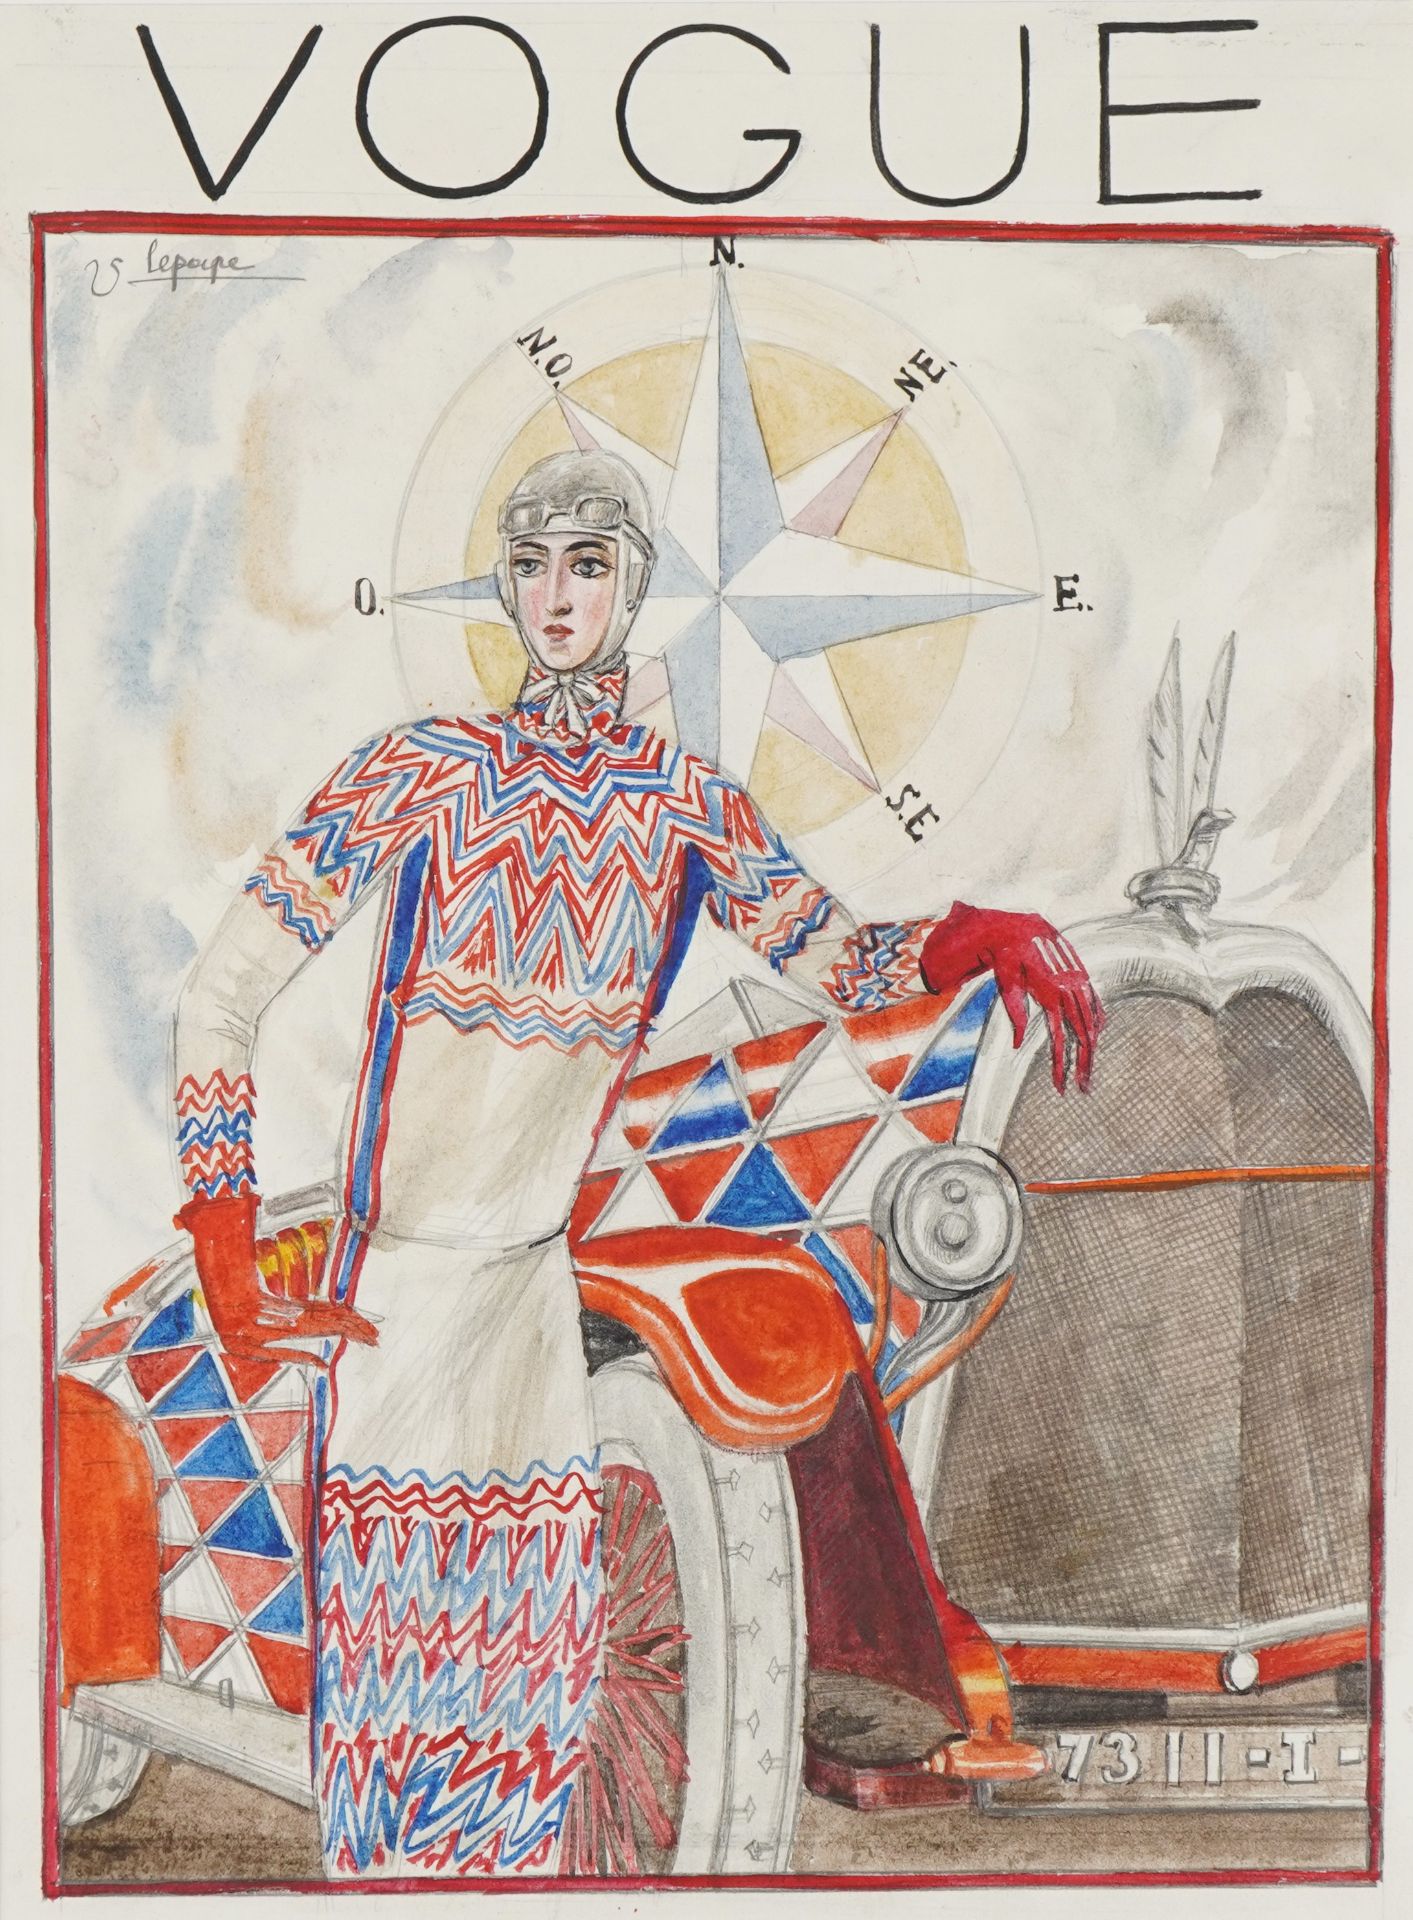 Georges Lepape - Vogue front cover, Sonia Delaunay before a classic car and compass, French